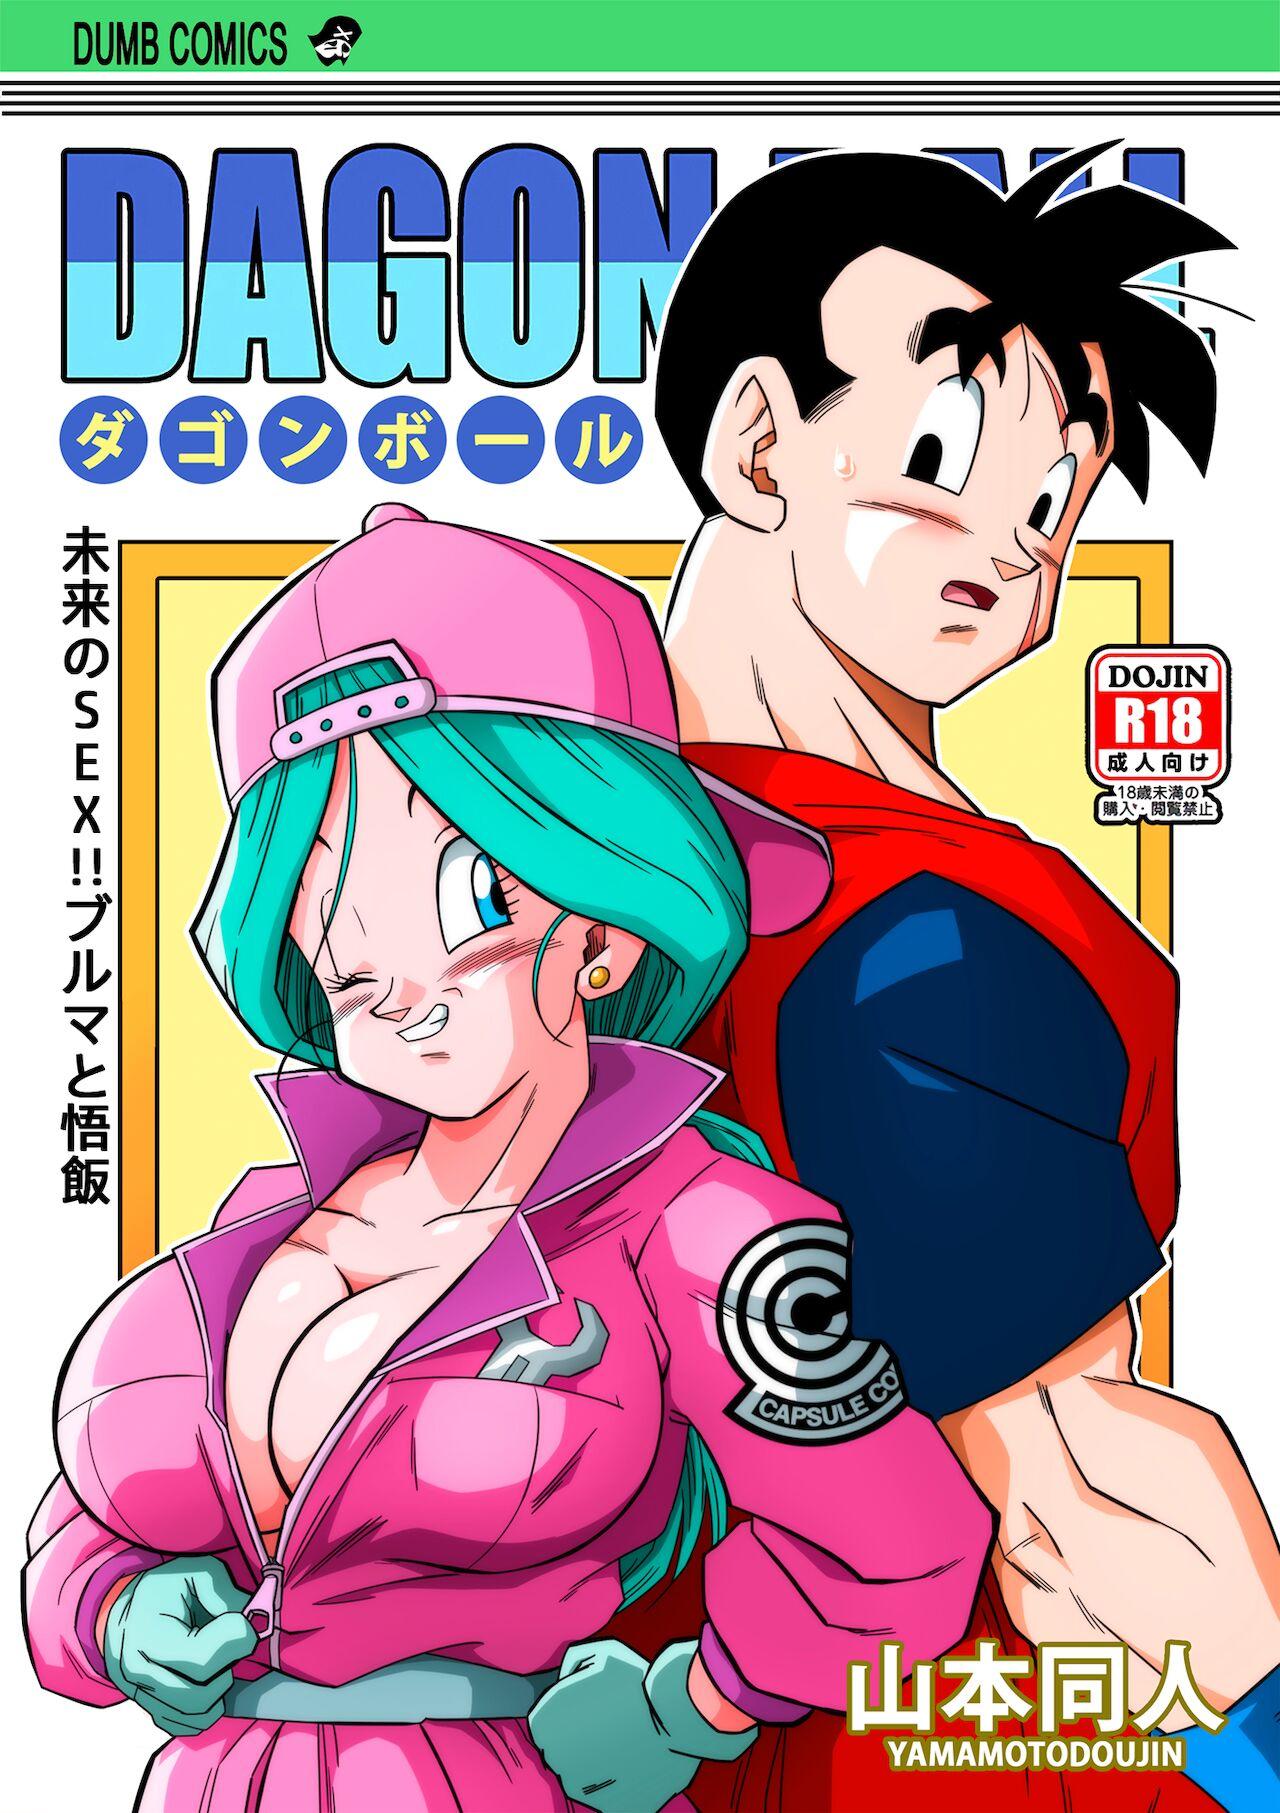 Lost of sex in this Future! - BULMA and GOHAN 1